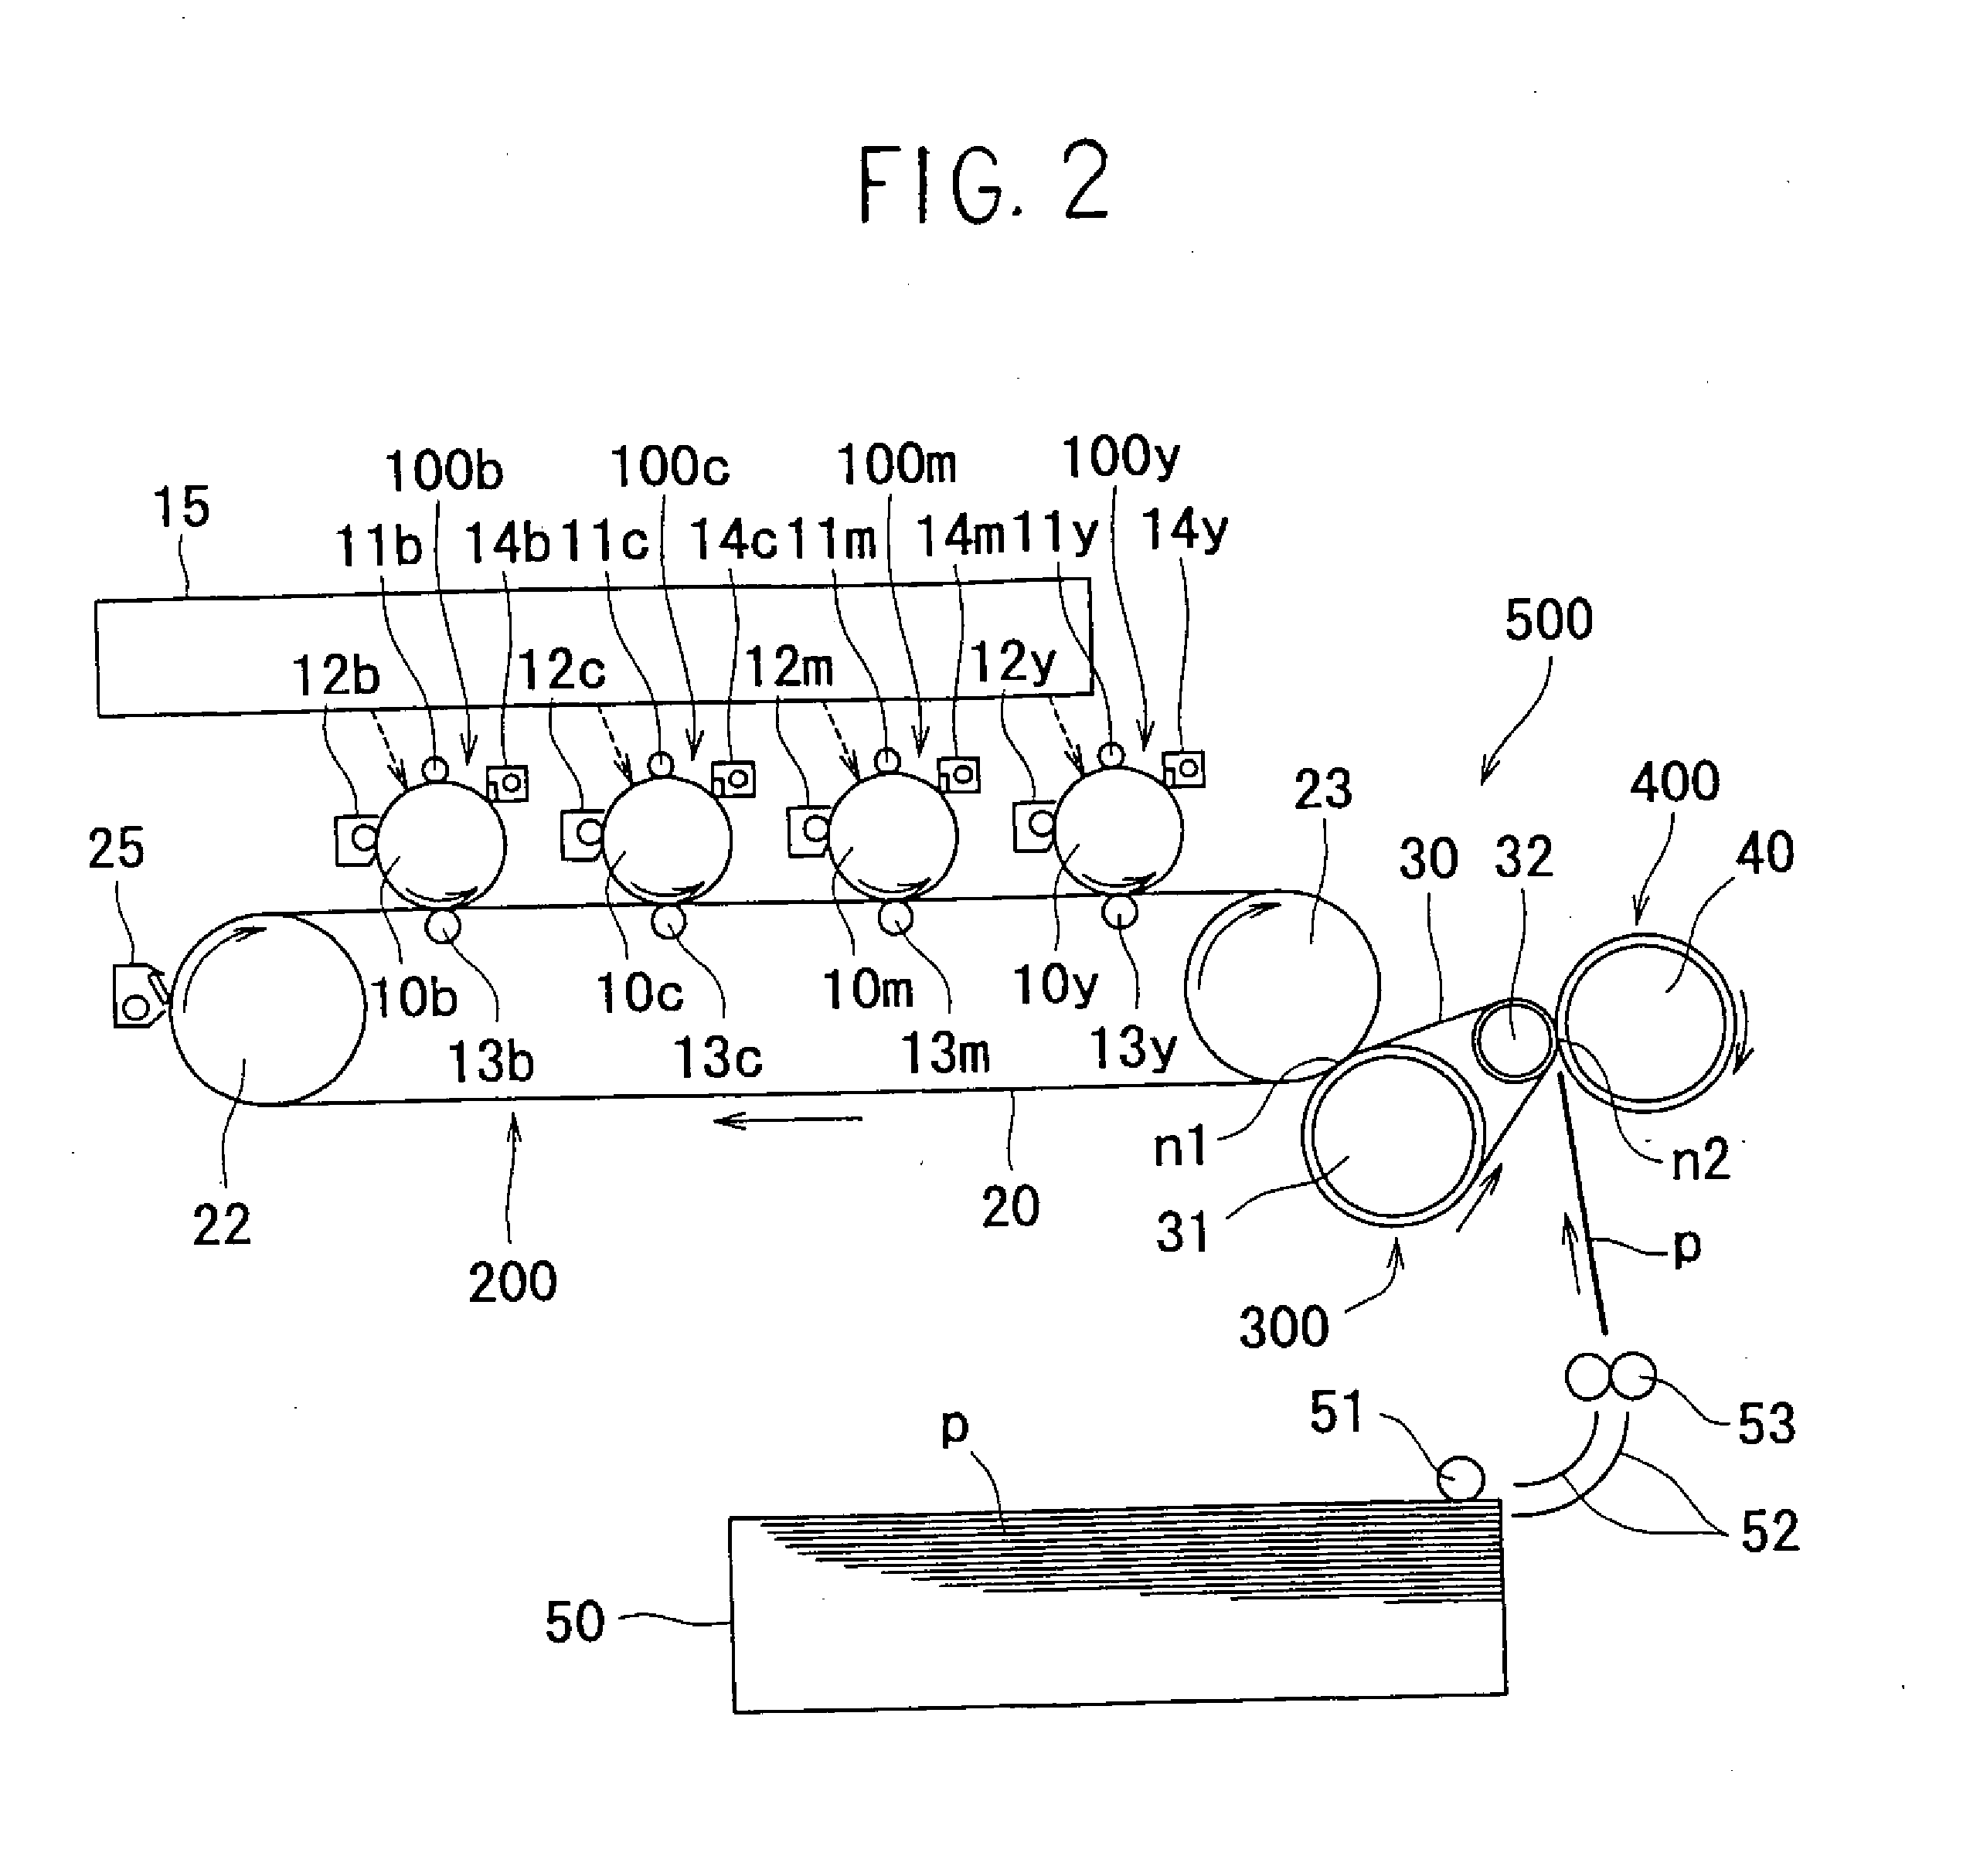 Image transfer device for image forming apparatus